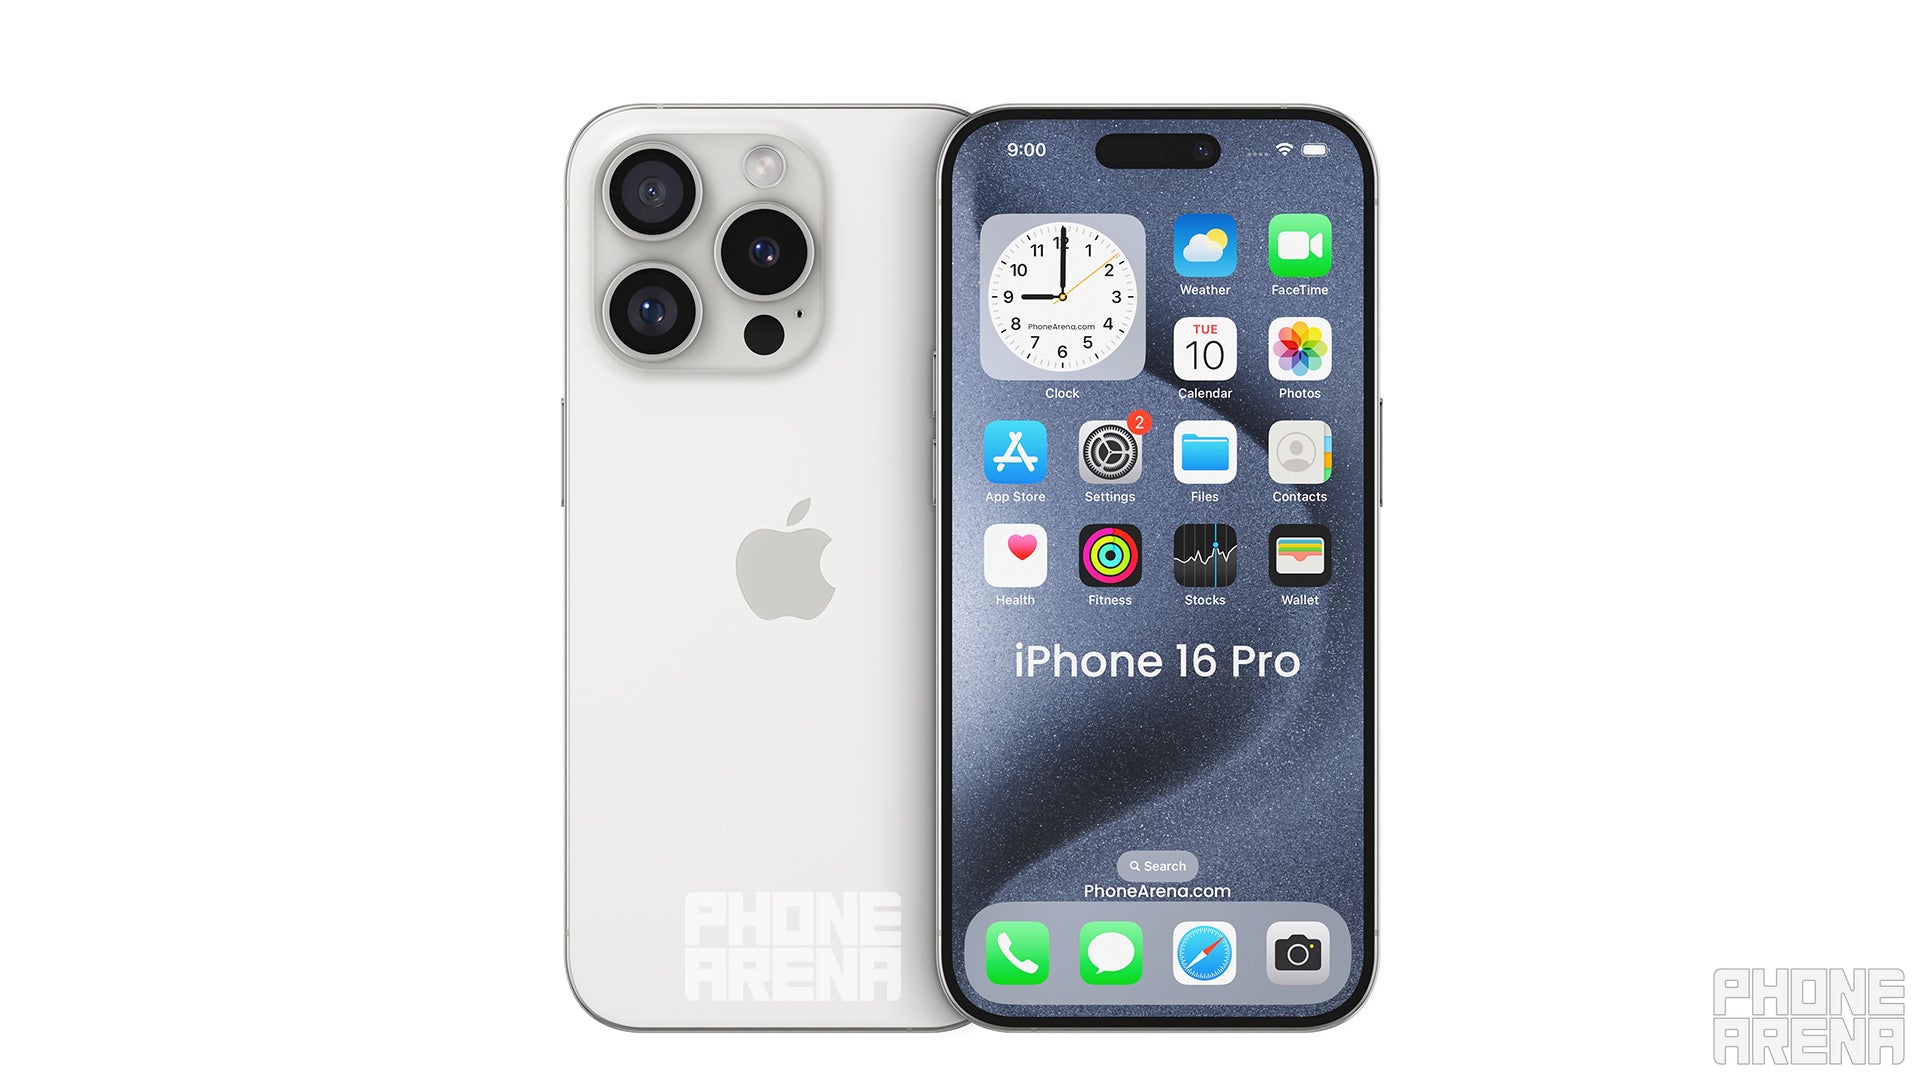 Image credit — PhoneArena - Apple might achieve the bezel-less dream with the iPhone 16 Pro but how?